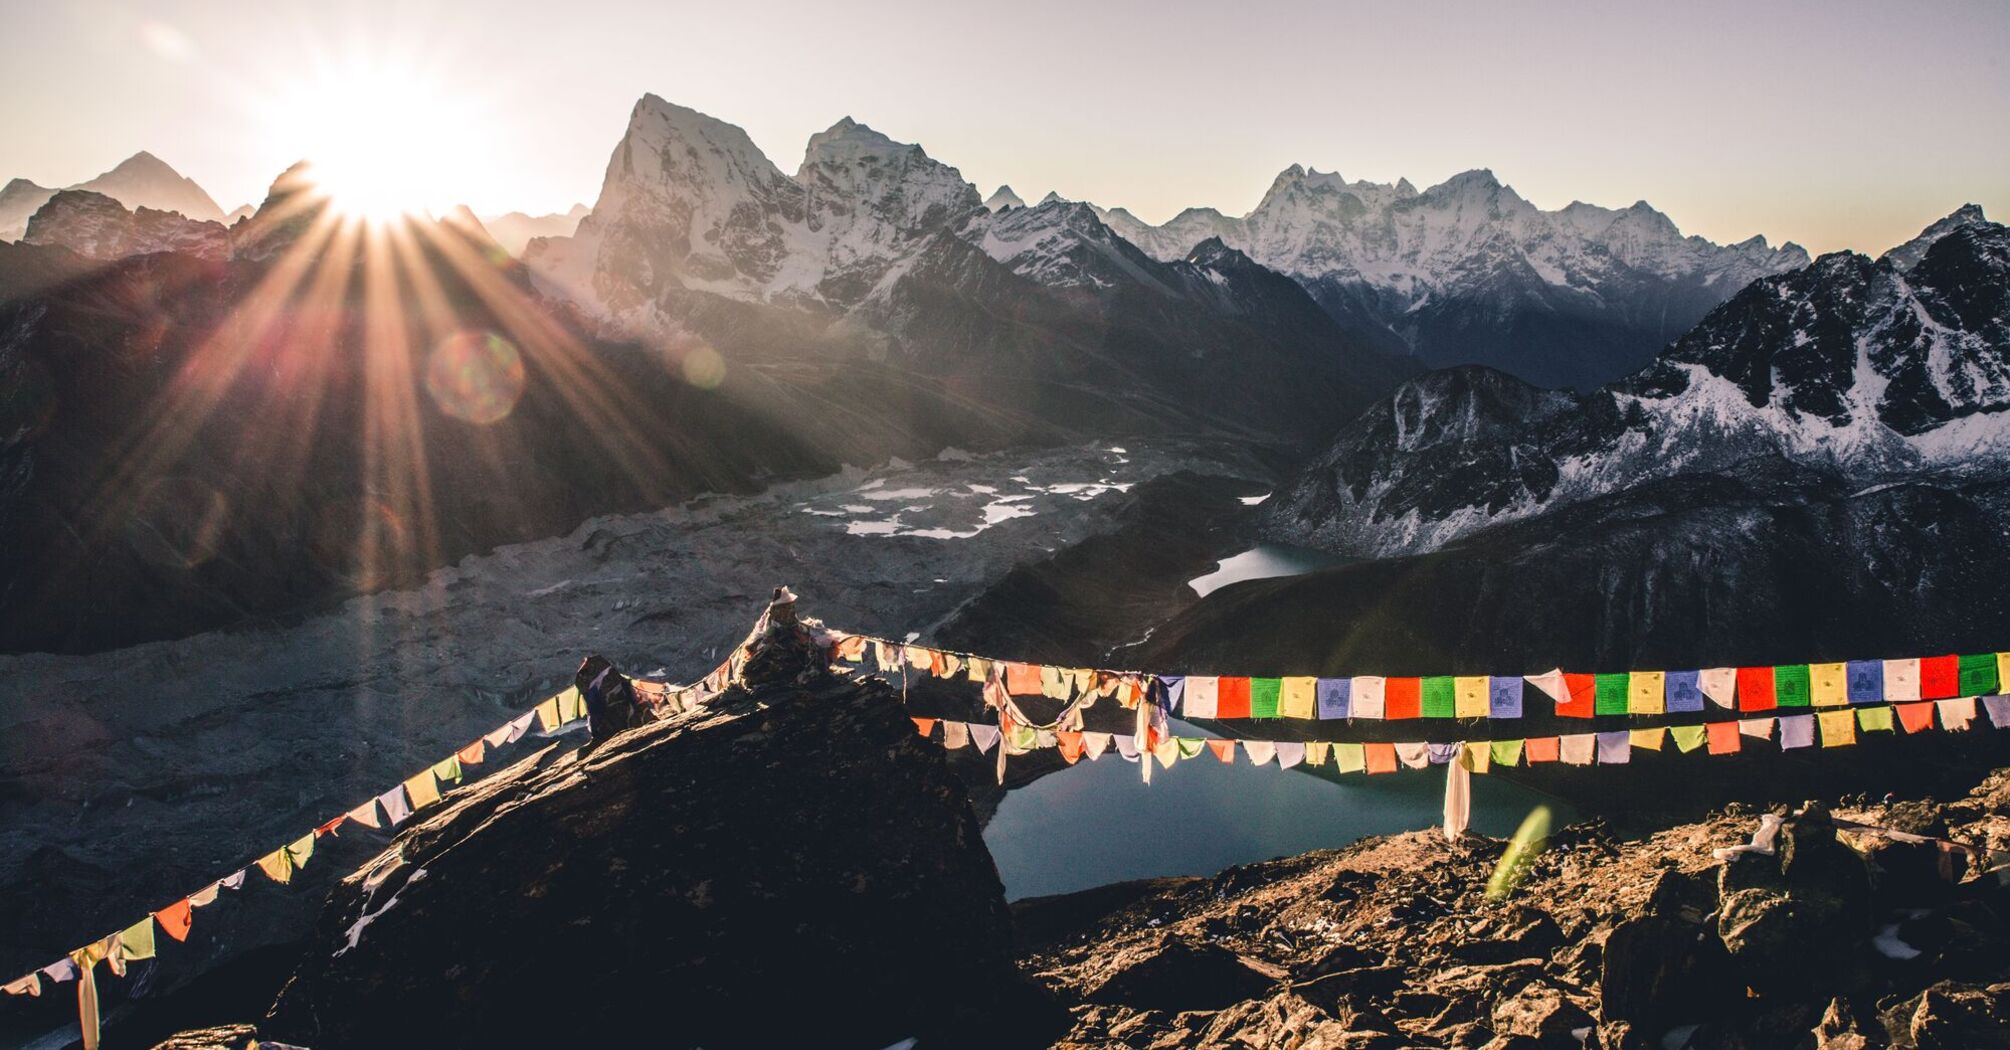 7 facts travelers should know about Nepal